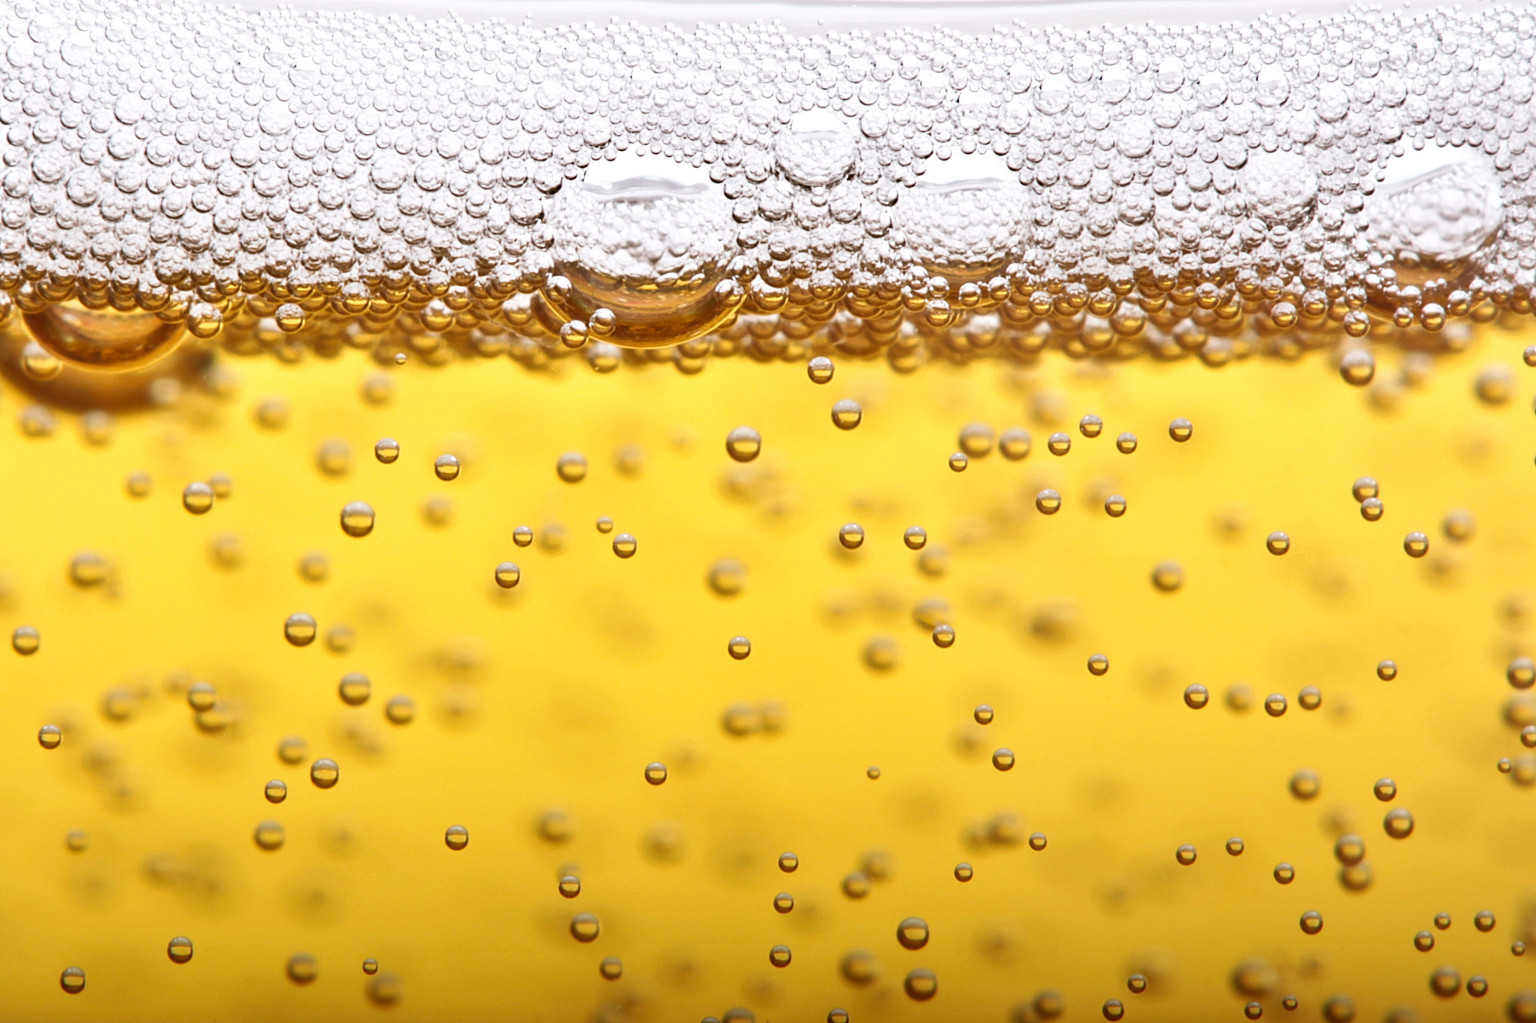 10 States Where People Drink The Most Beer